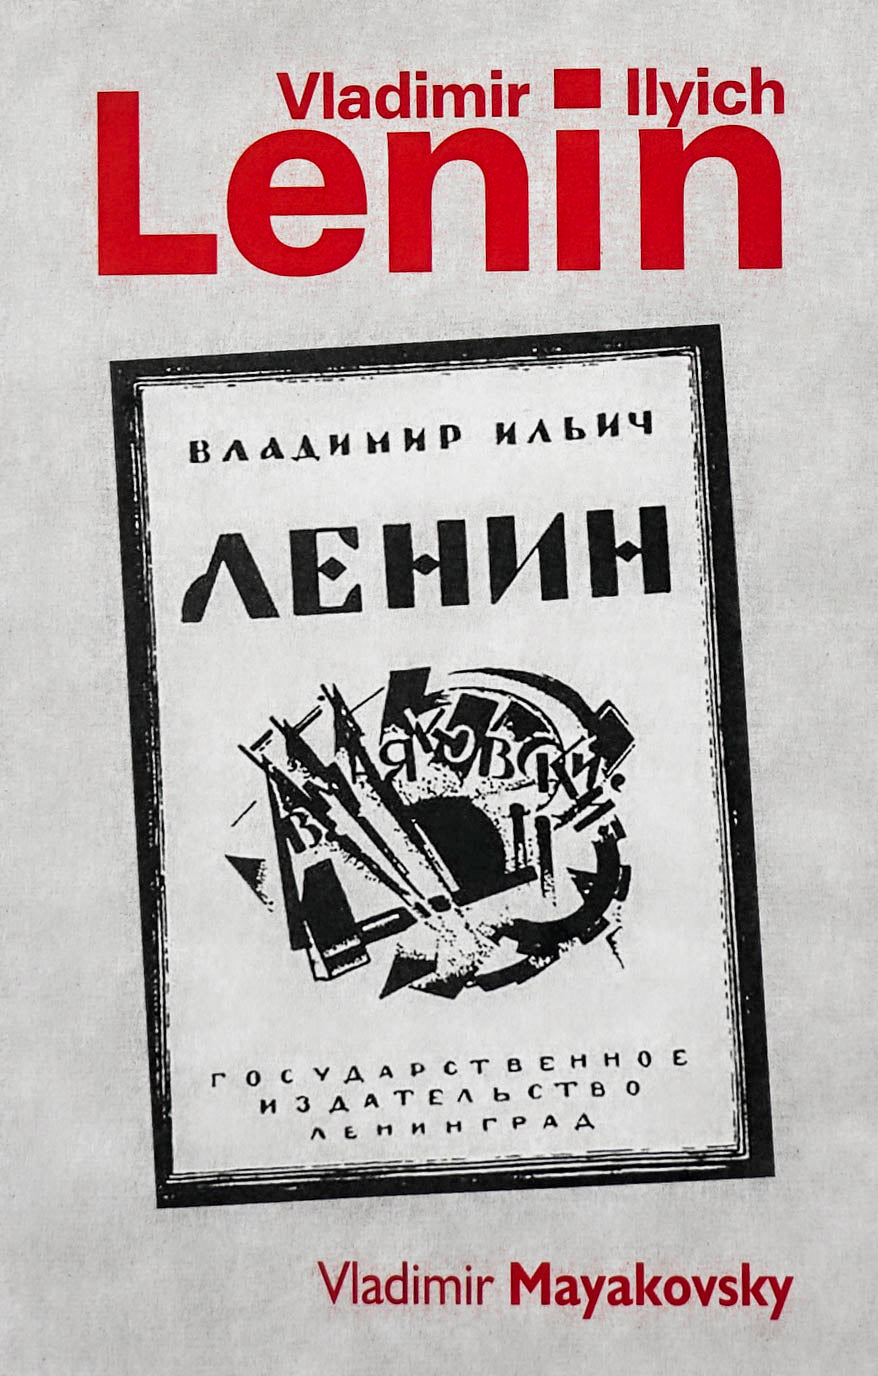 Vladimir Ilyich Lenin in red sans serif type over a grey backdrop with Russian text